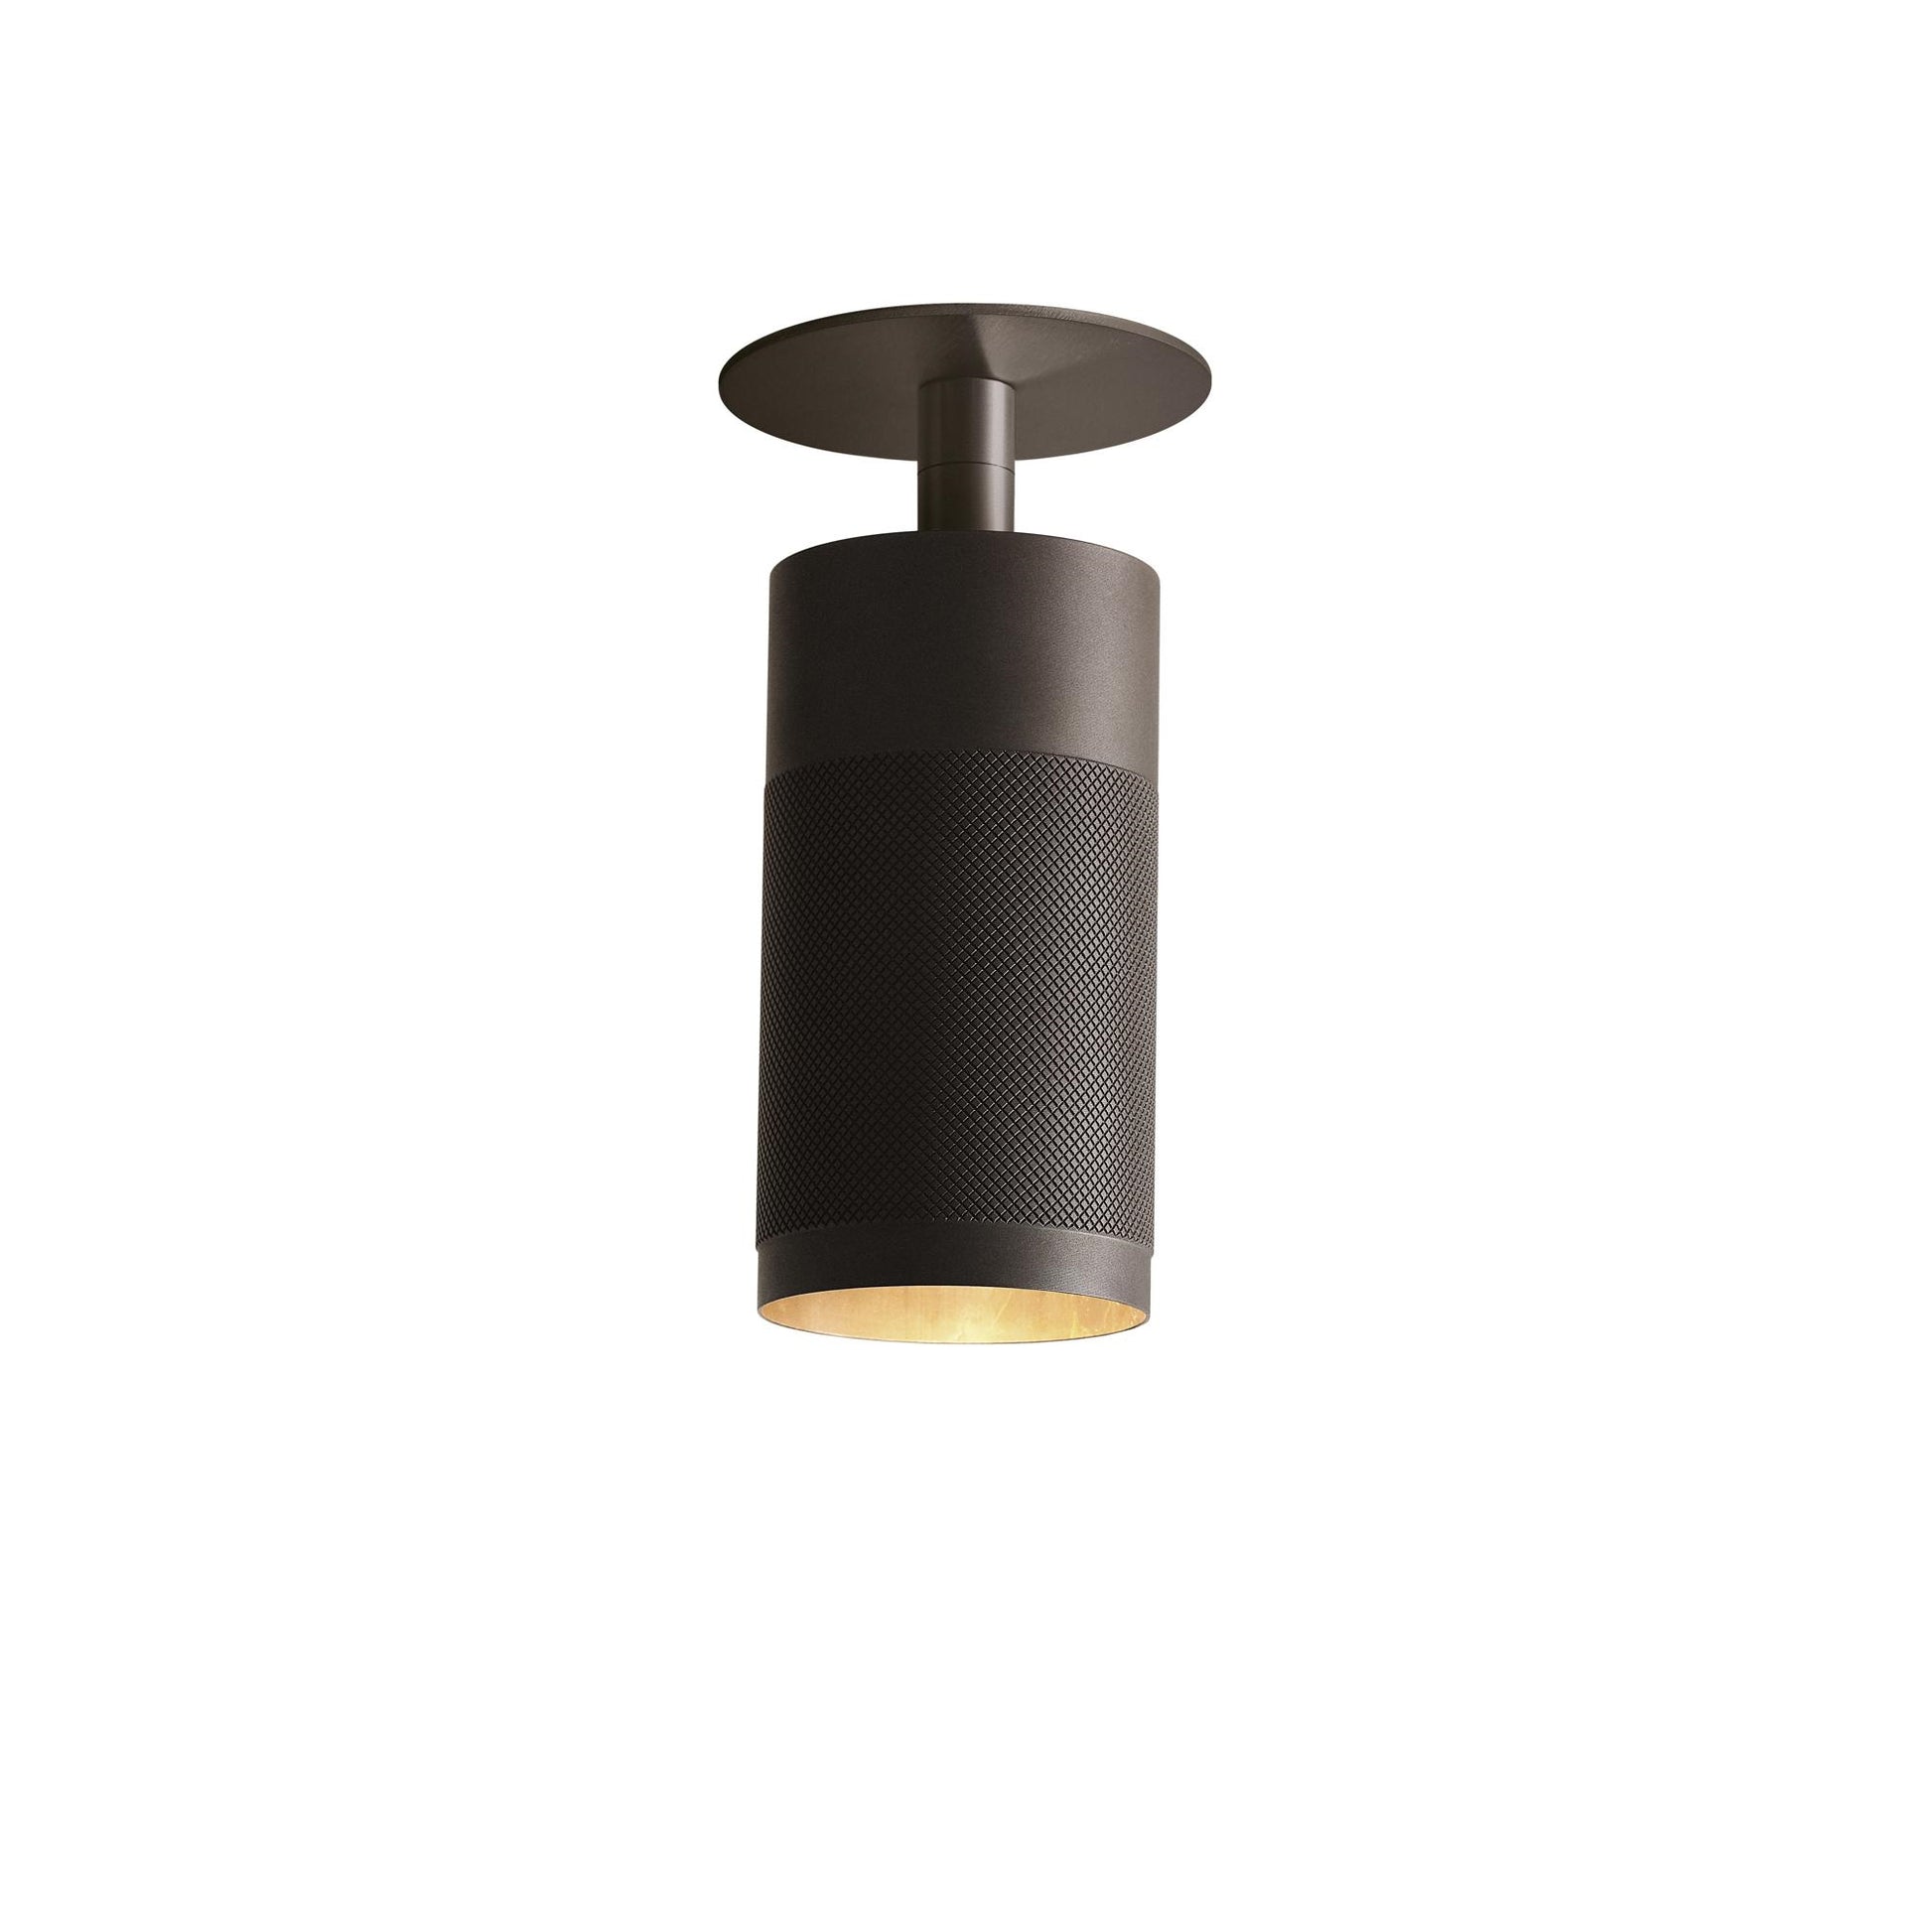 Patrone Recessed Ceiling Light by Thorup Copenhagen #Browned brass